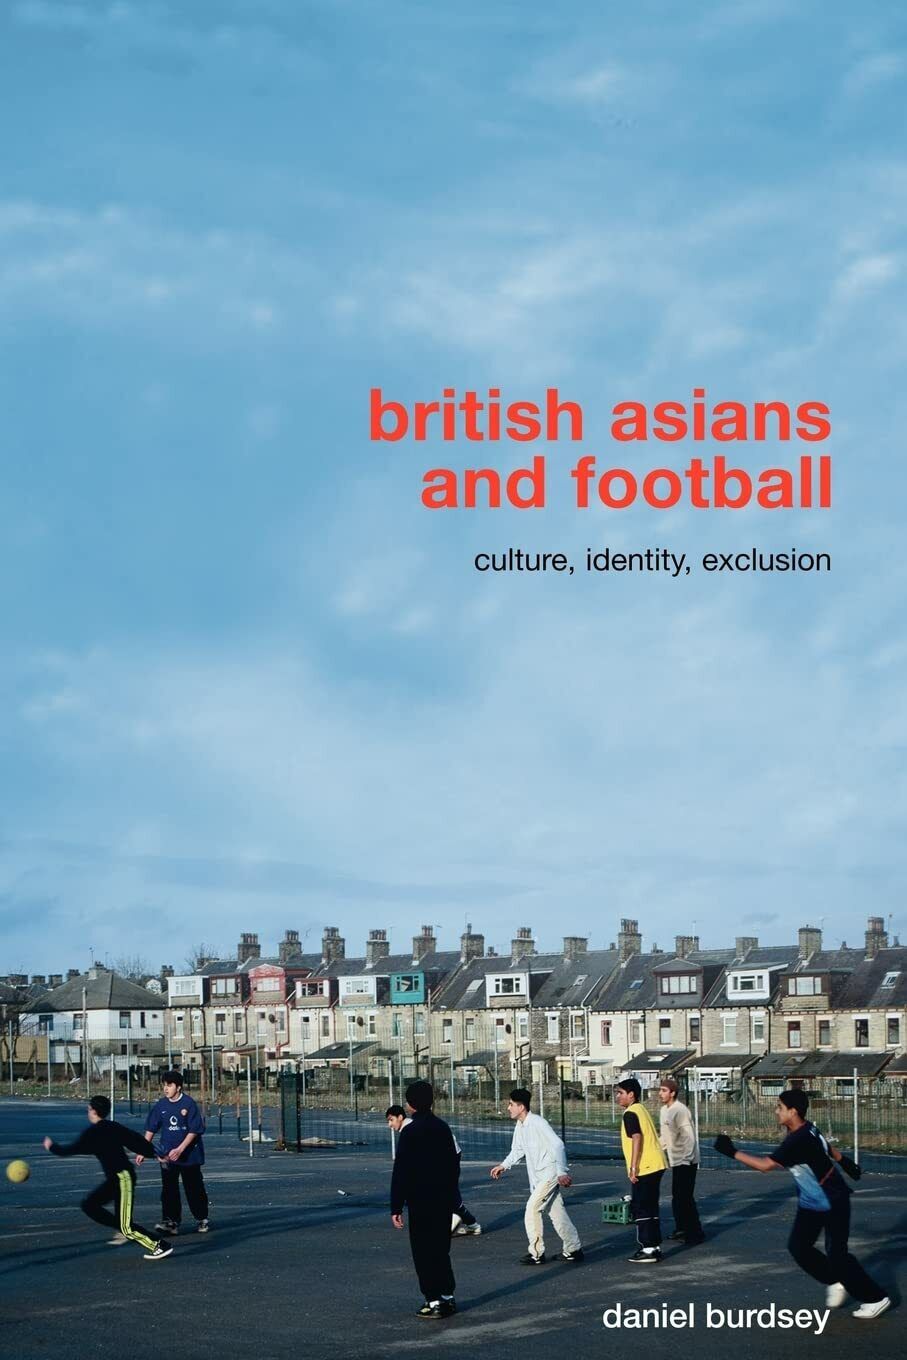 British Asians and Football - Daniel Burdsey - Routledge, 2008